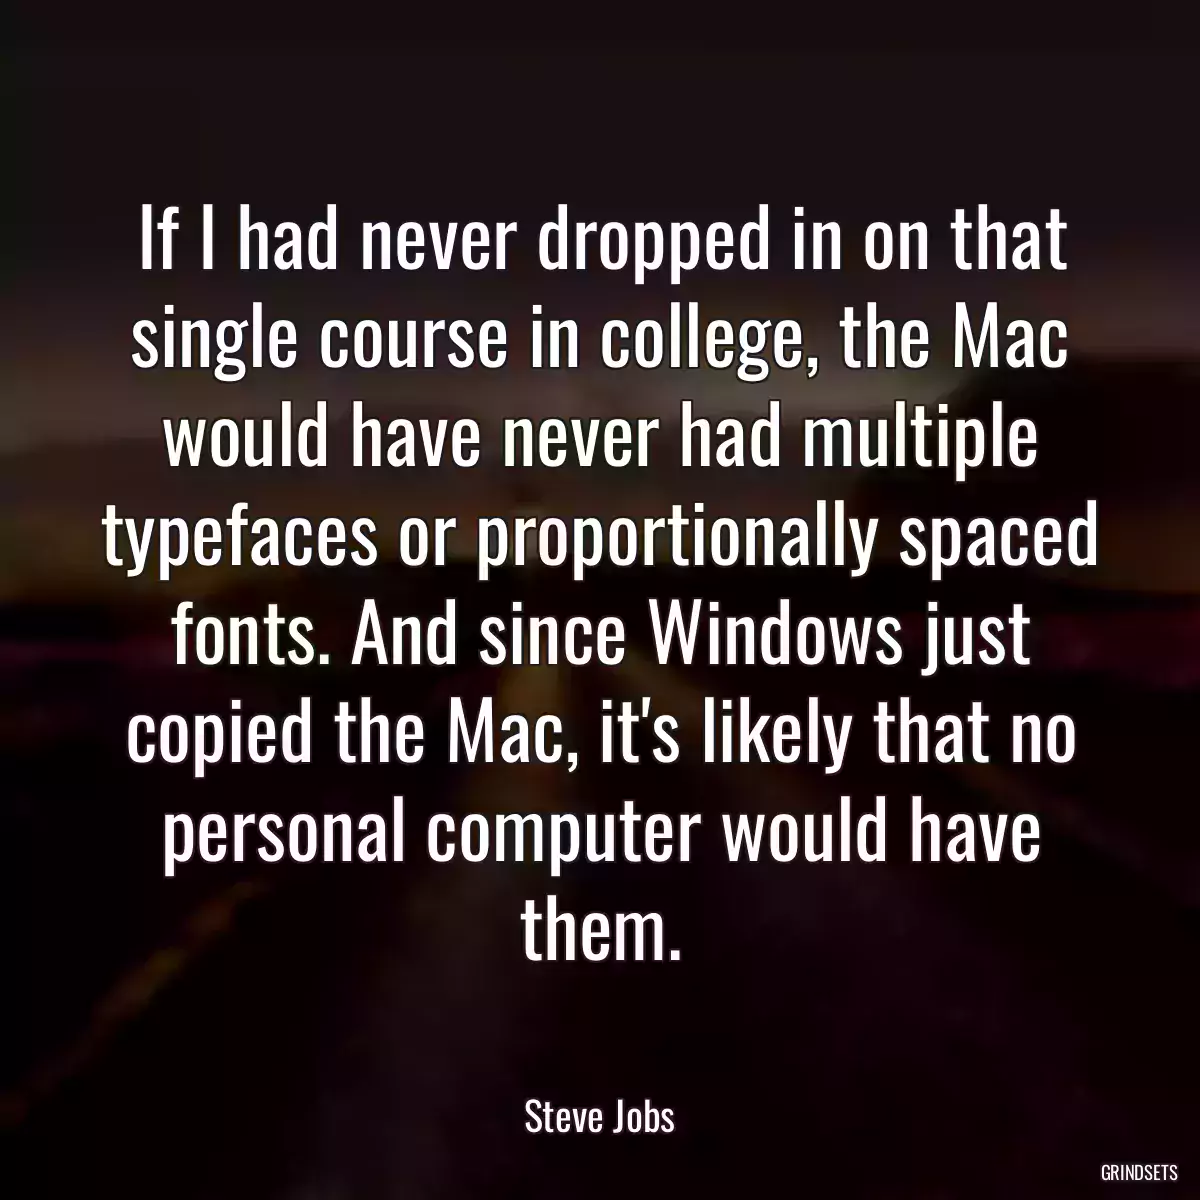 If I had never dropped in on that single course in college, the Mac would have never had multiple typefaces or proportionally spaced fonts. And since Windows just copied the Mac, it\'s likely that no personal computer would have them.